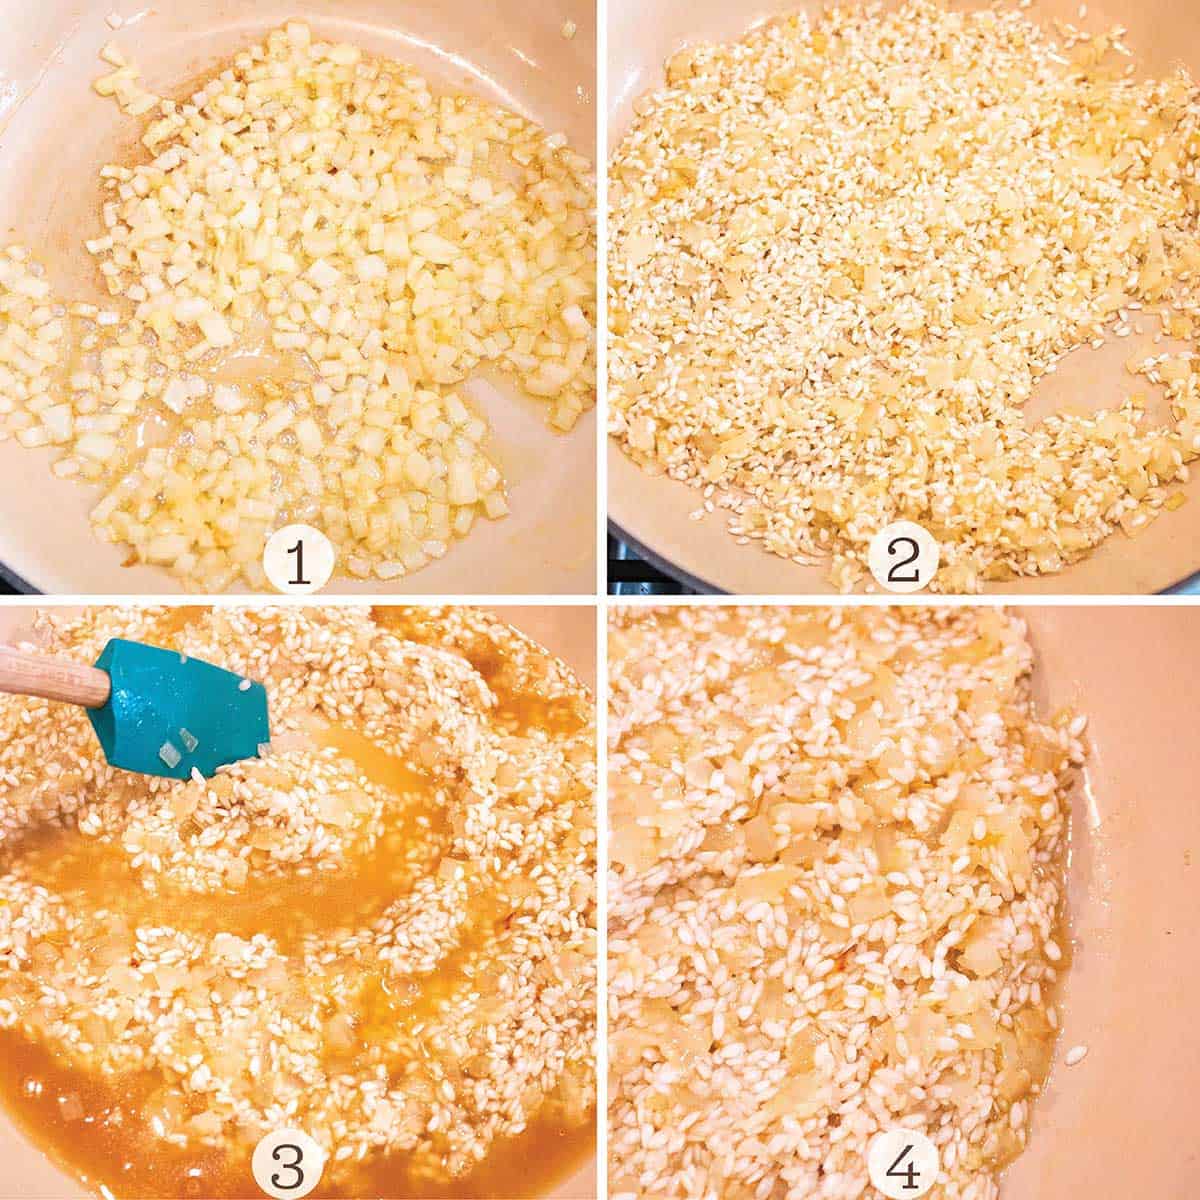 Photos of four different steps to make risotto.